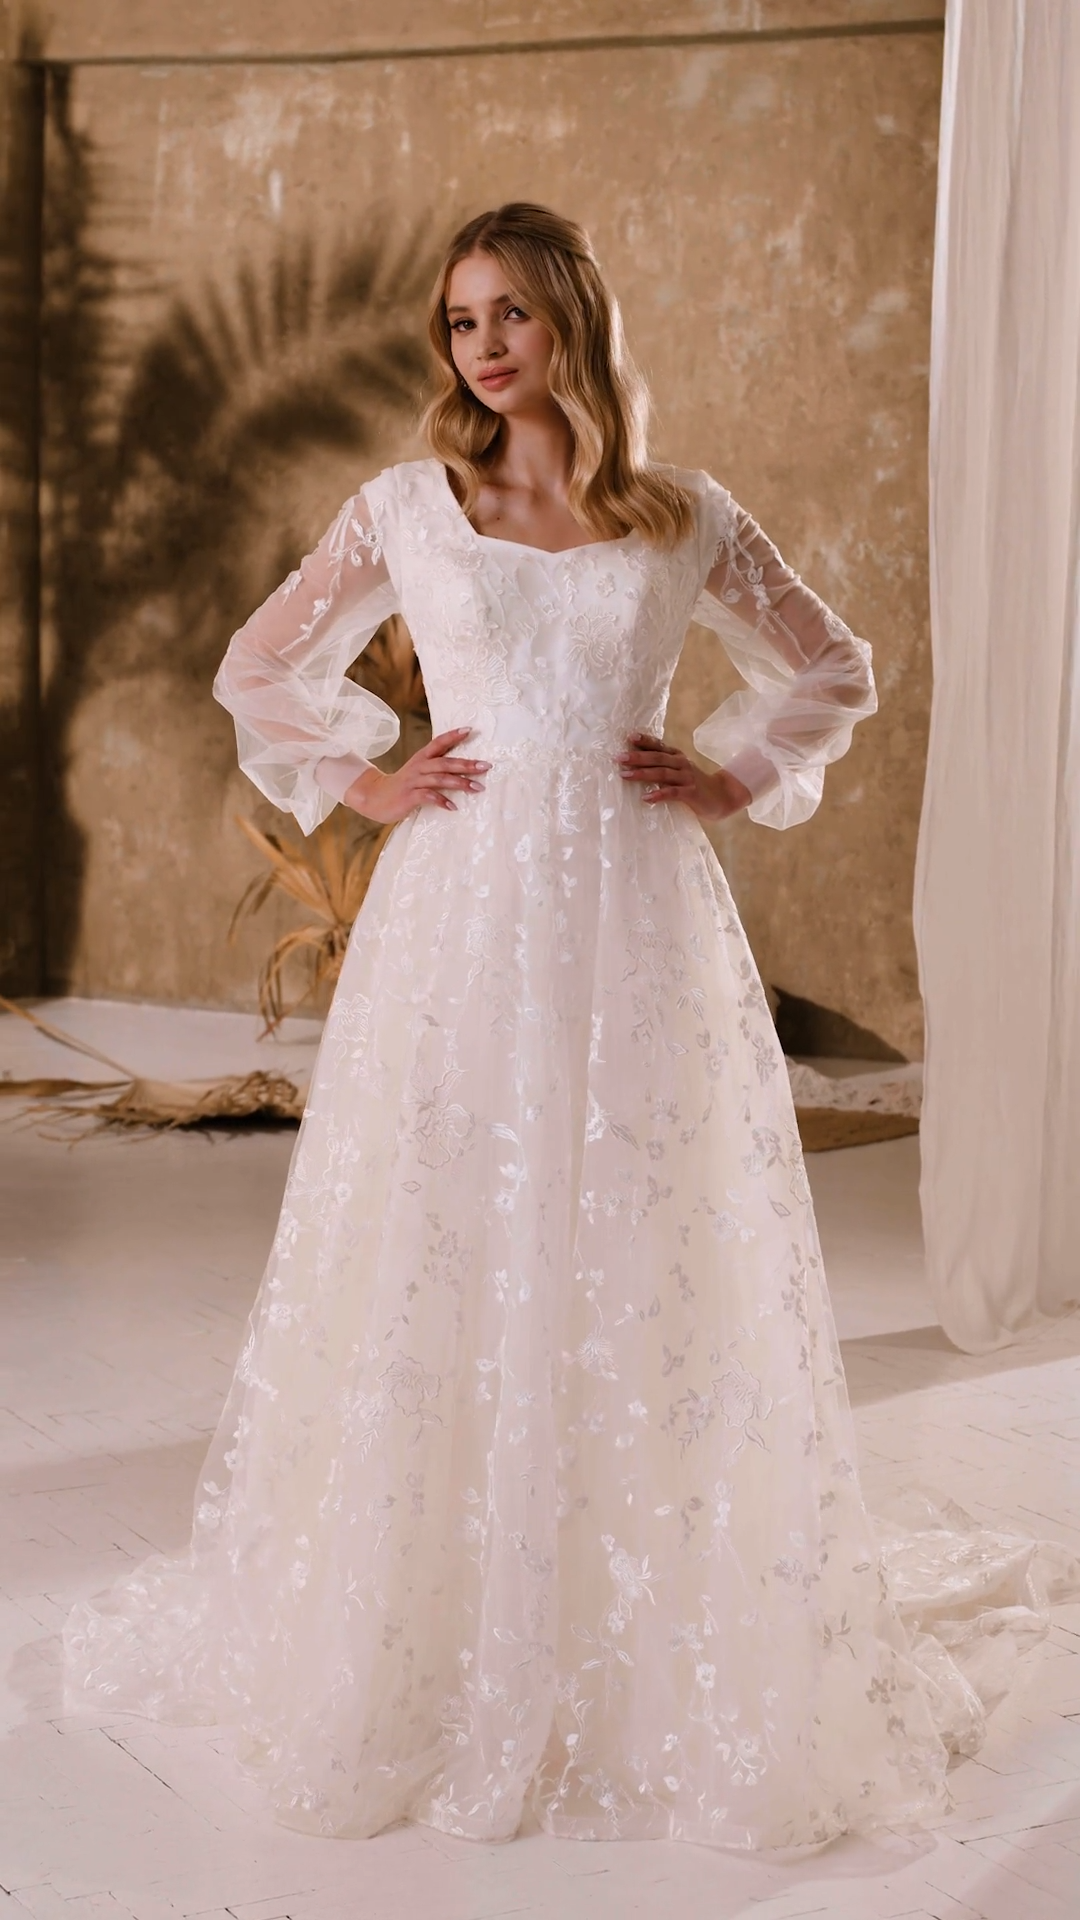 Floral Lace Modest Sweetheart Neck Wedding Dress With Bishop Sleeves Style M5054